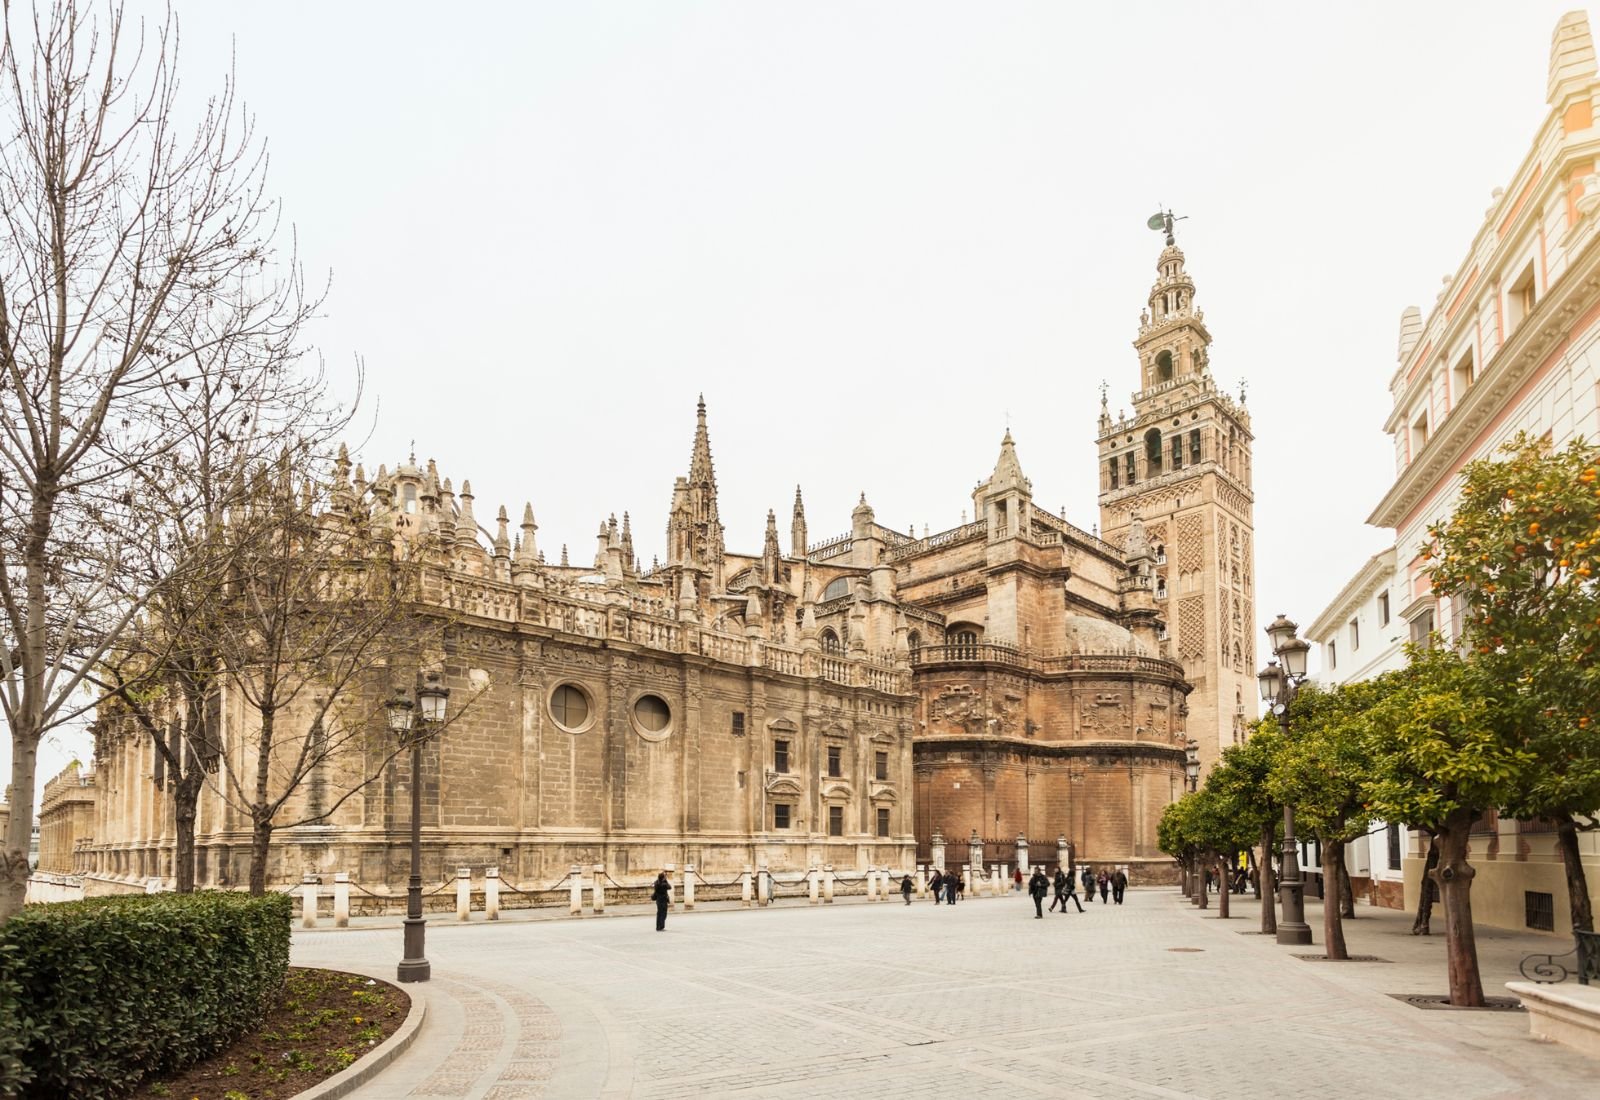 A photo of the exterior of the Seville cathedral.